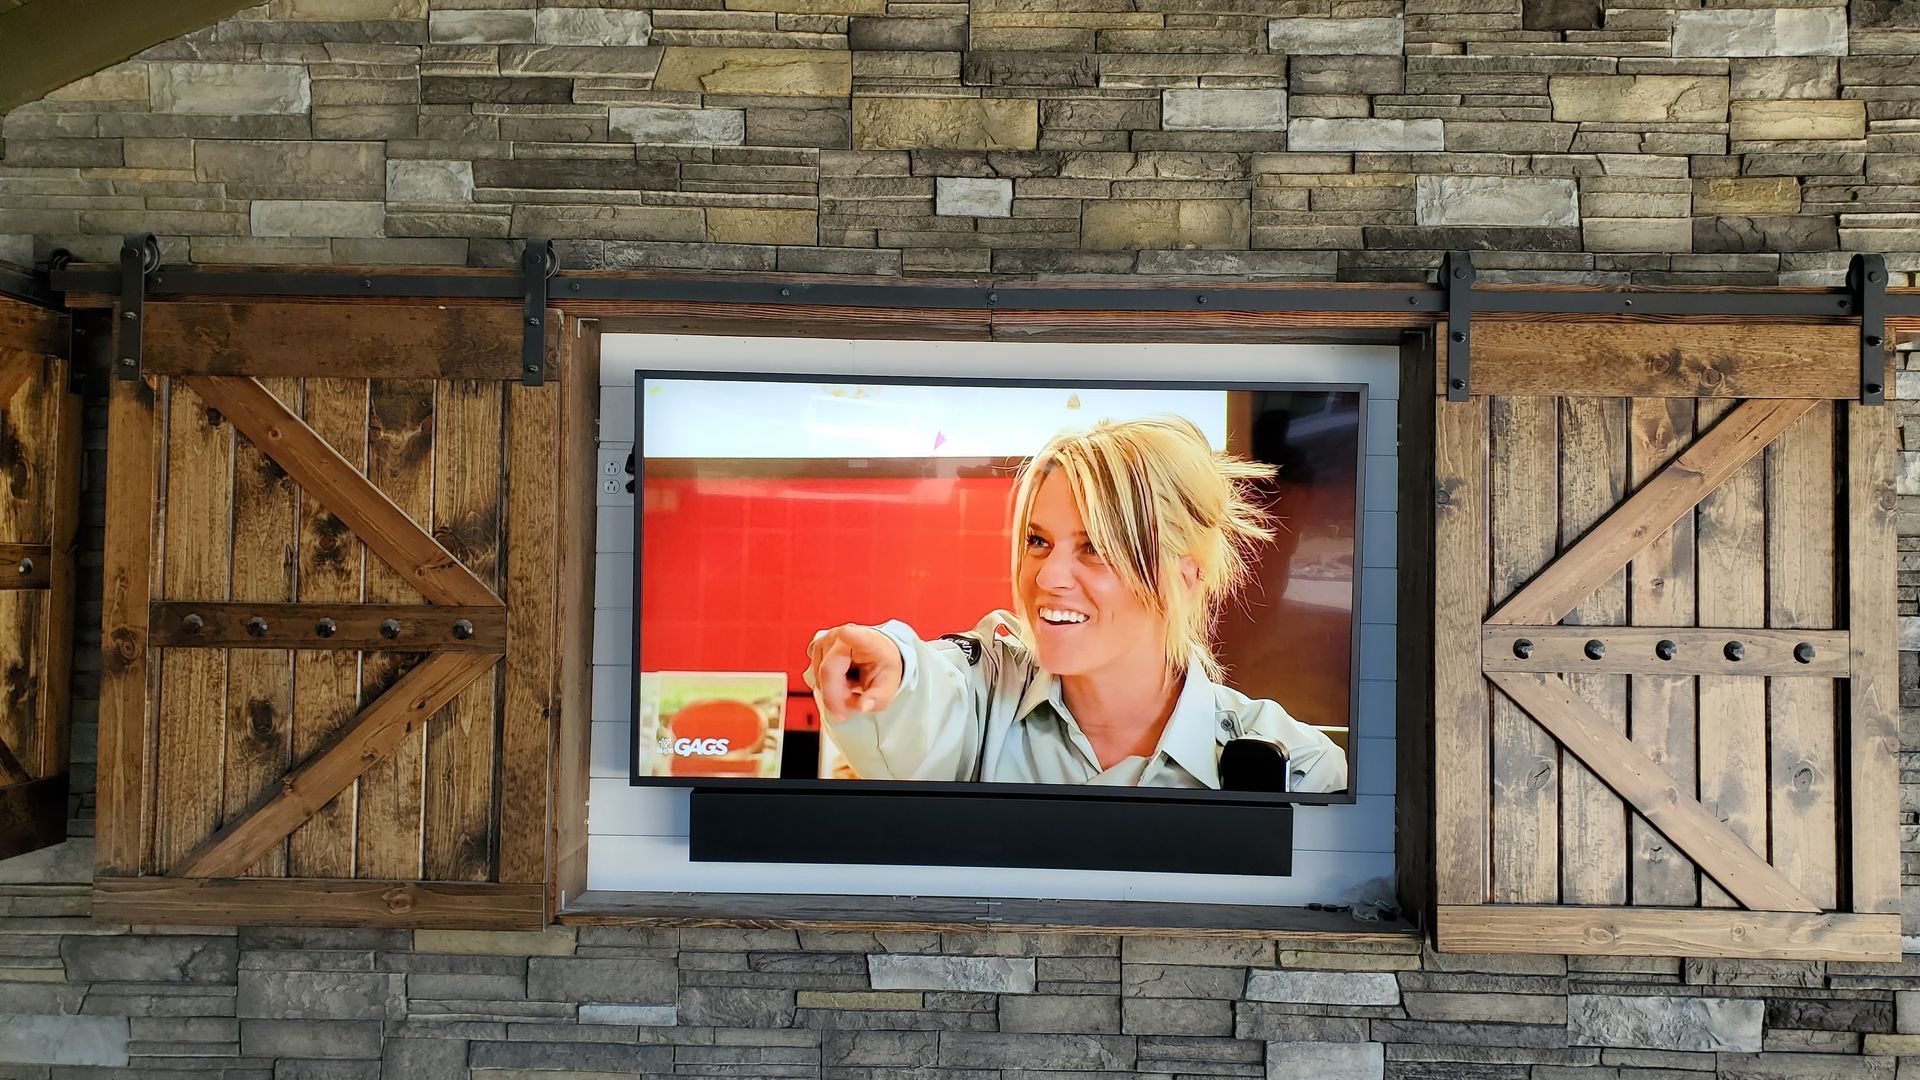 an outdoor samsung terrace TV and soundbar in a custom outdoor cabinet with an outdoor audio system